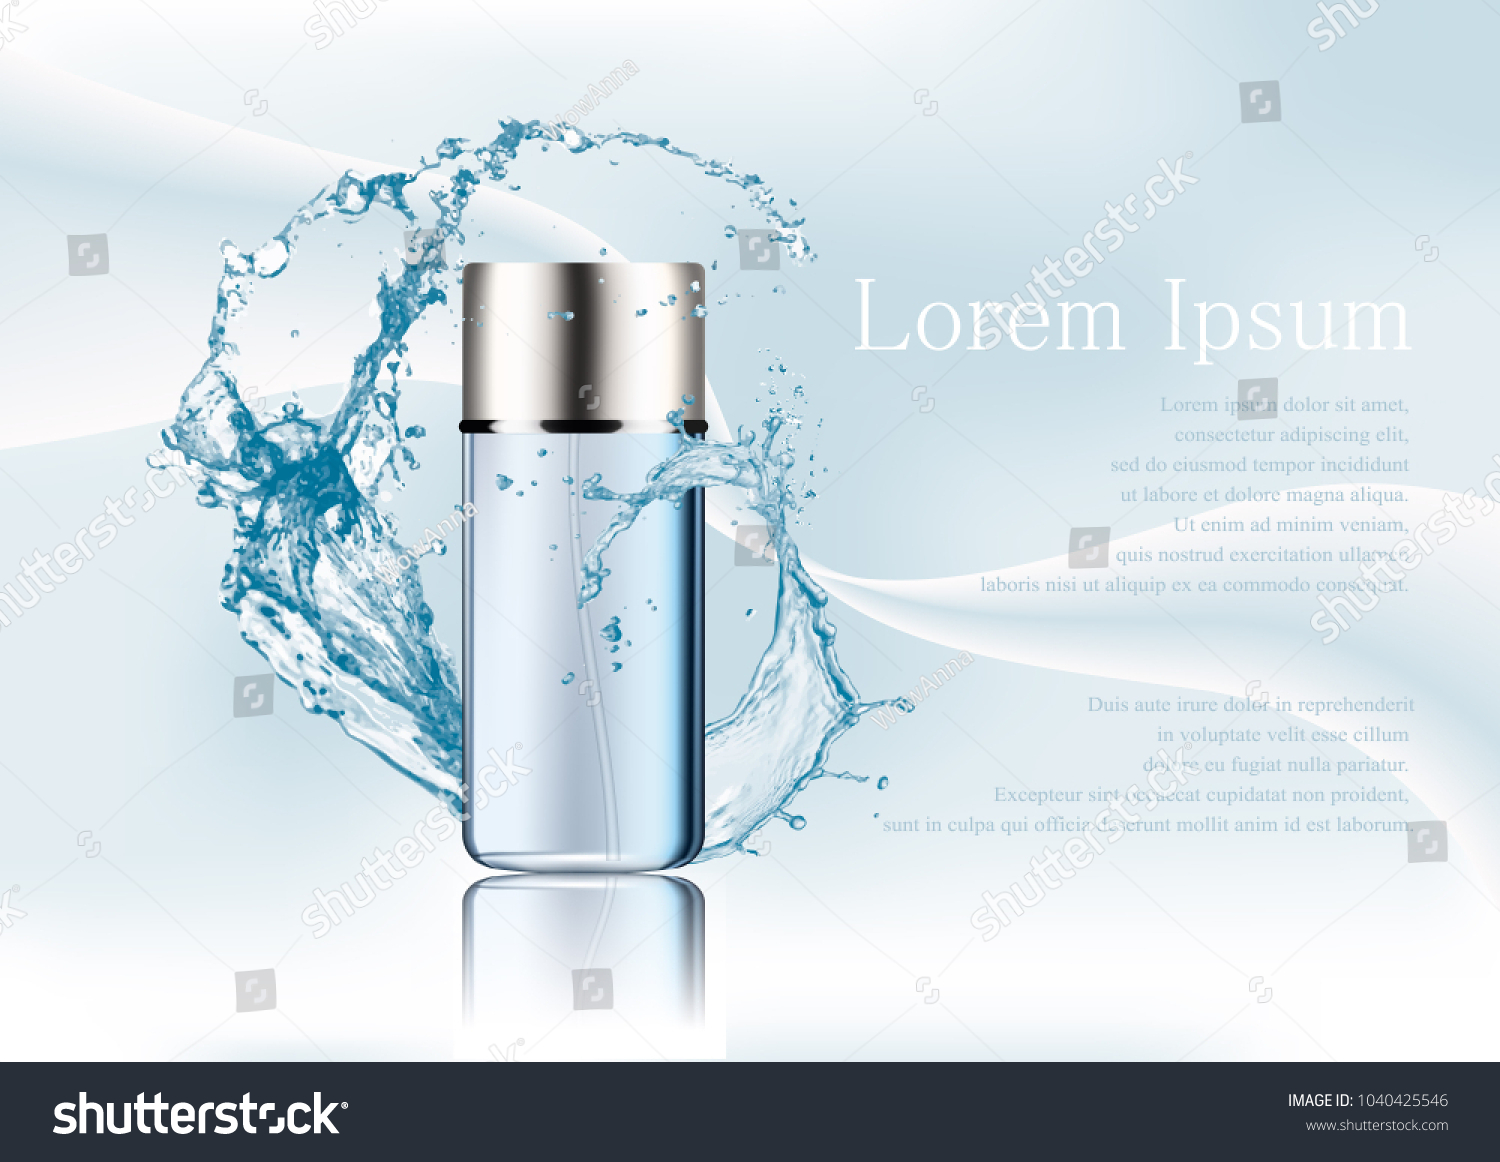 Advertising magazine page,Splash of water,realistic transparent blue glass package for cosmetic products tube,perfume flacon,with text on an abstract stylish gradient background.Vector illustration. #1040425546